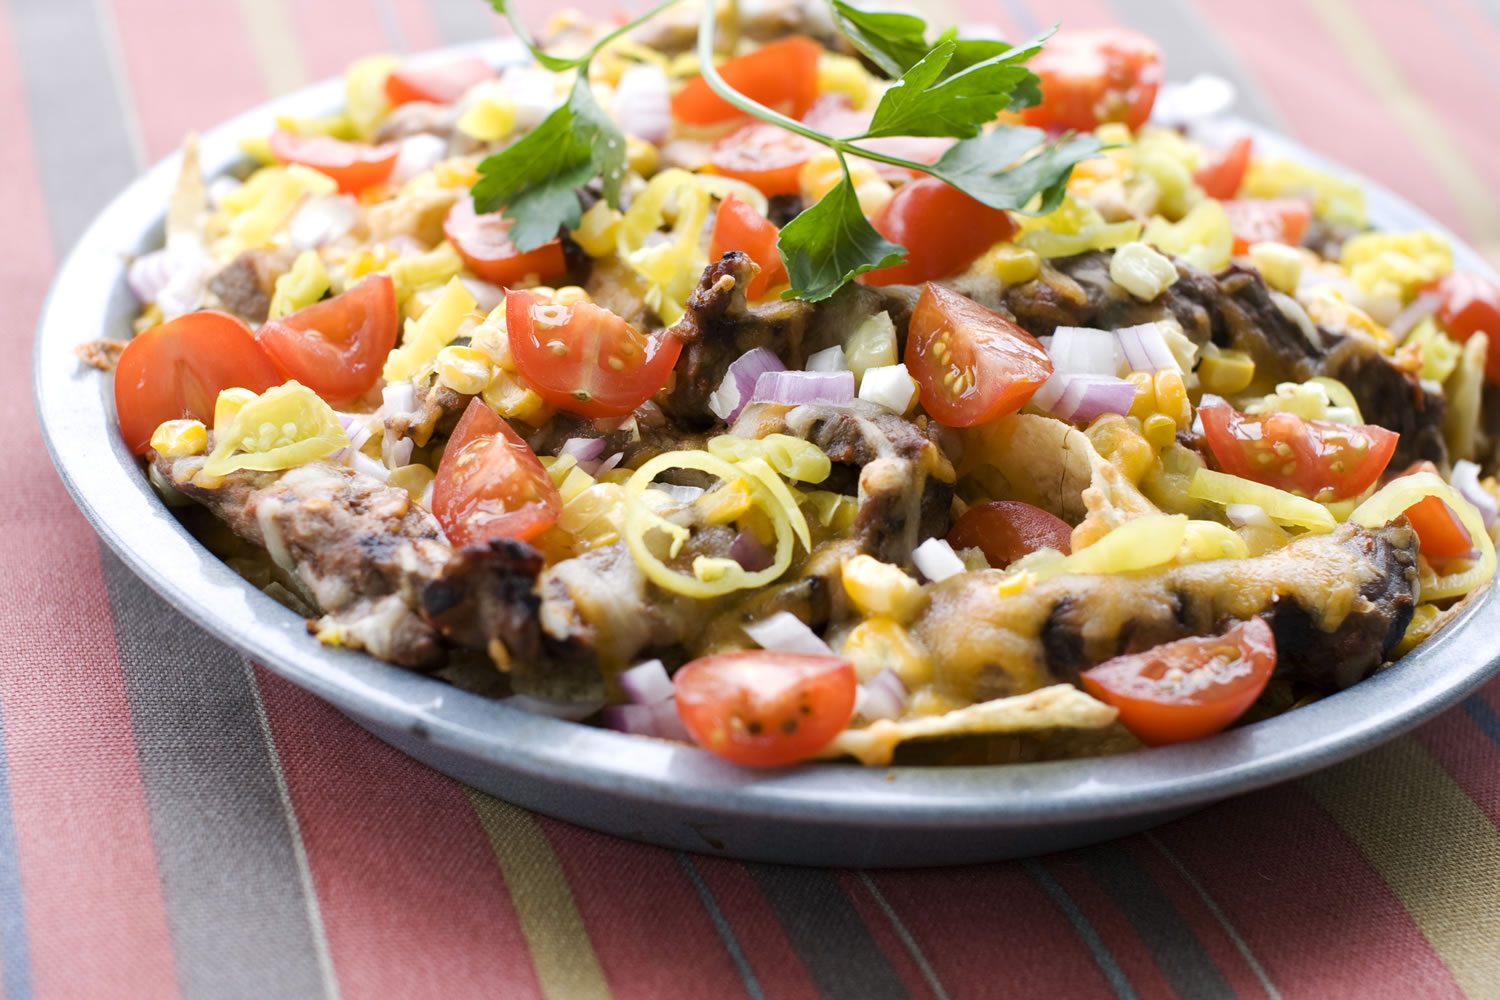 Corn and Steak Grilled Nachos is the next evolution of the layered Mexican dish.